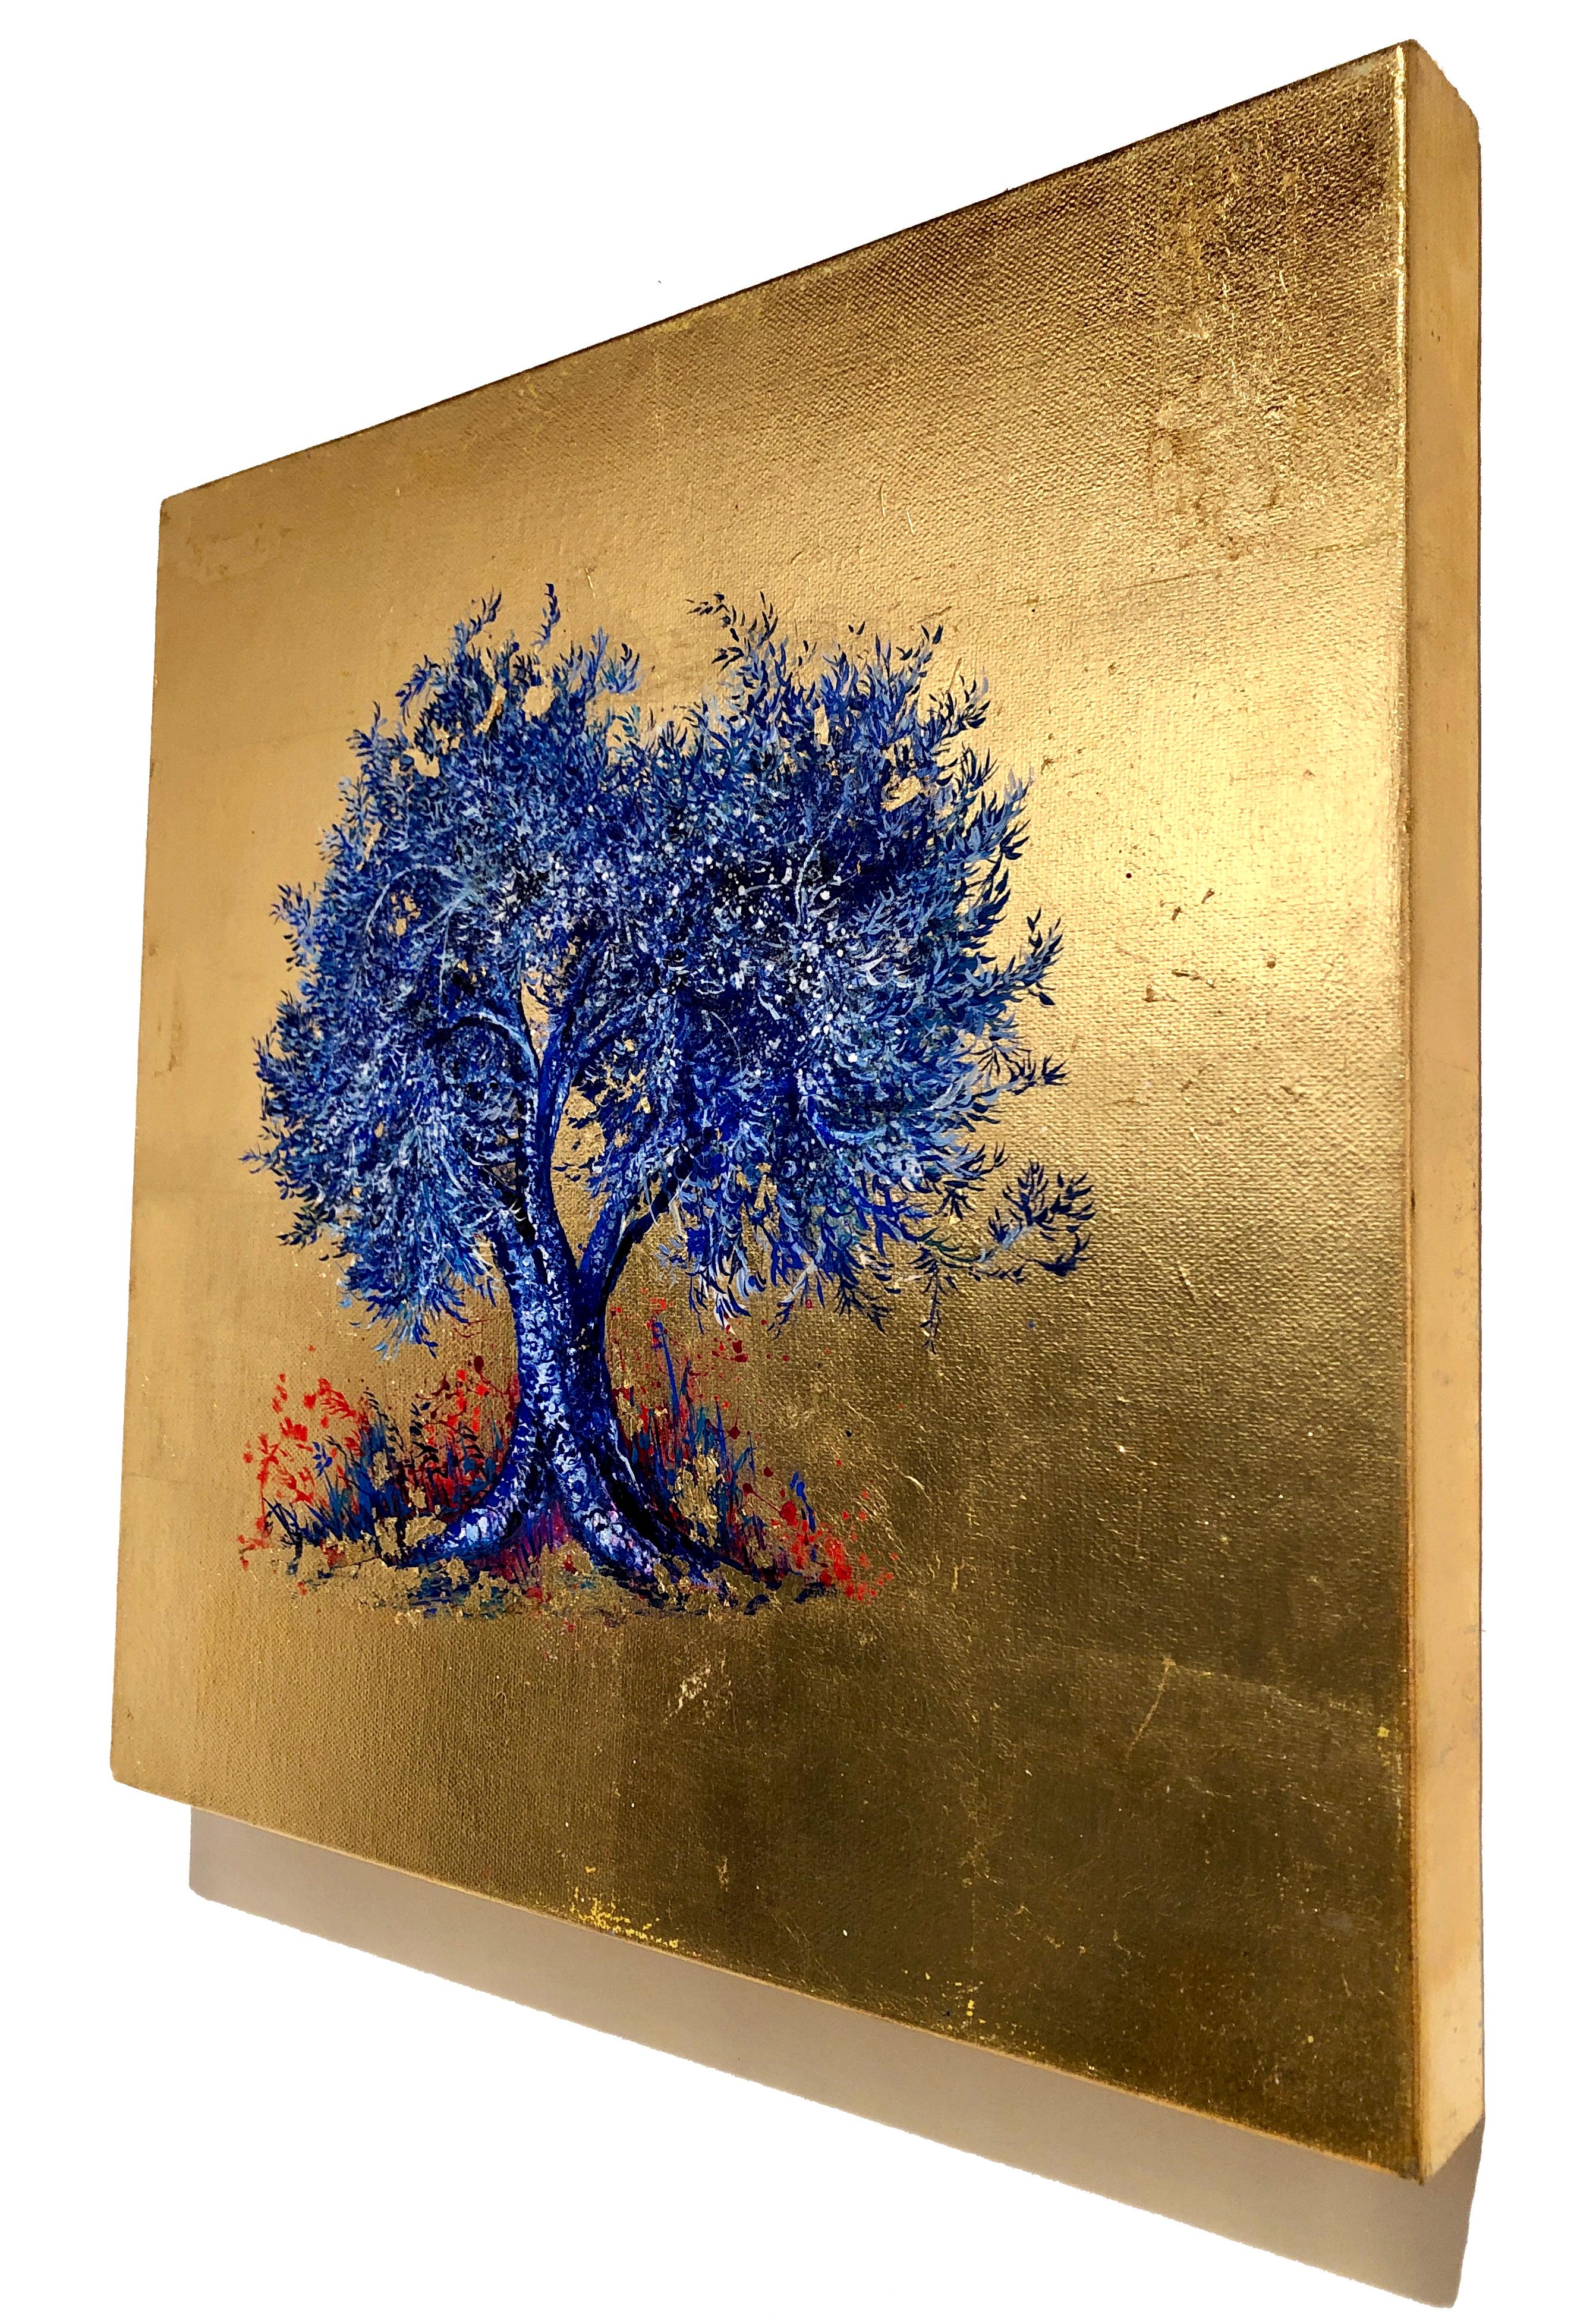 Indigo, Blossom Blue Tree, Contemporary Oil on Canvas Gold Leaf Painting  1